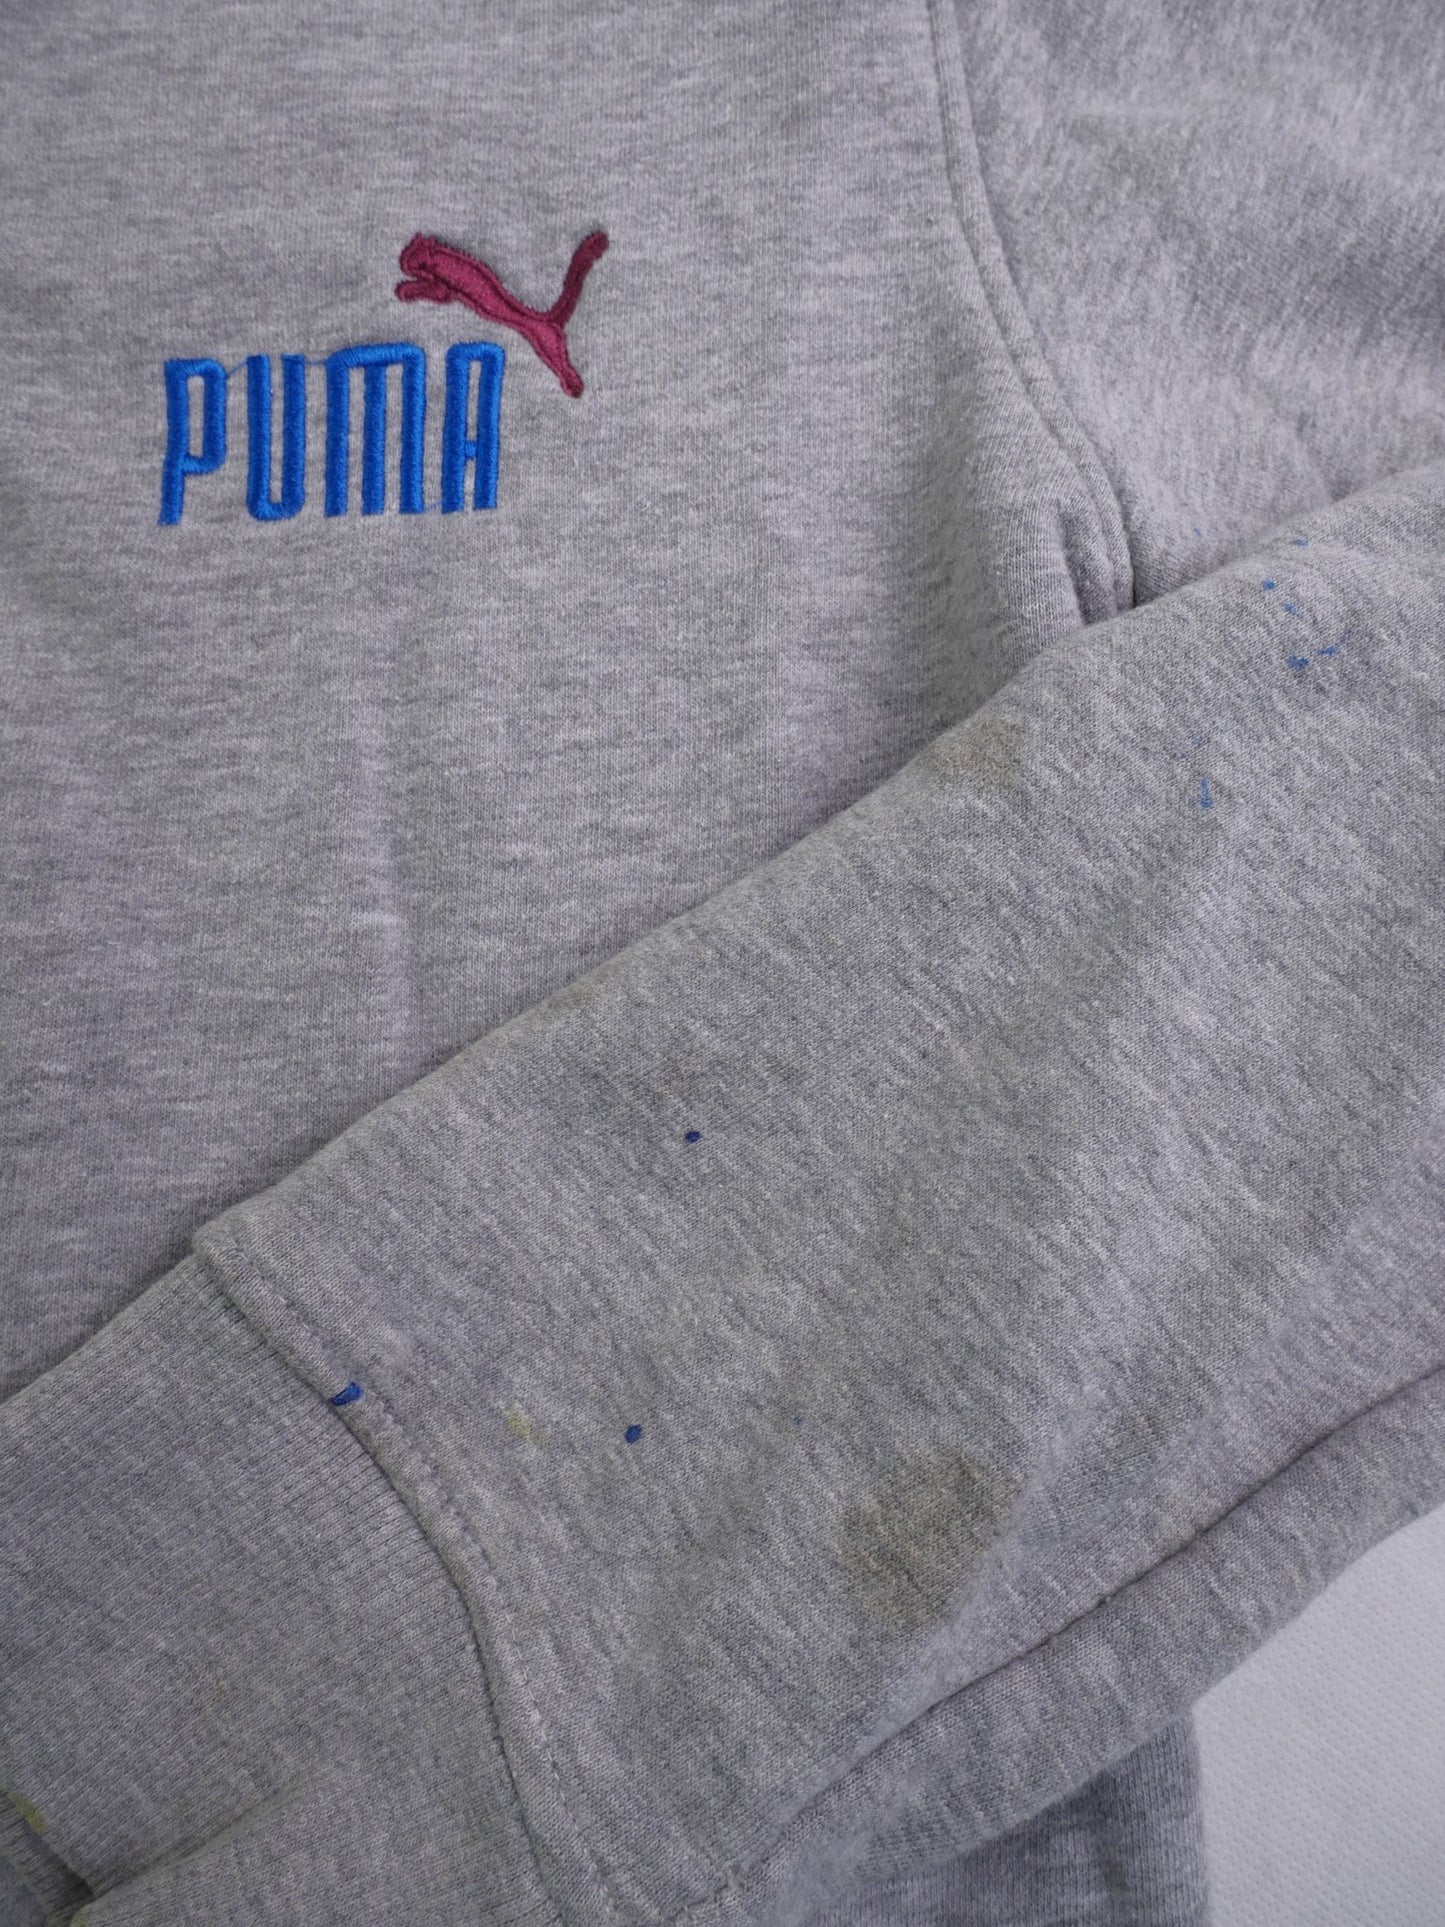 Puma embroidered Spellout Vintage Zip Hoodie - Peeces